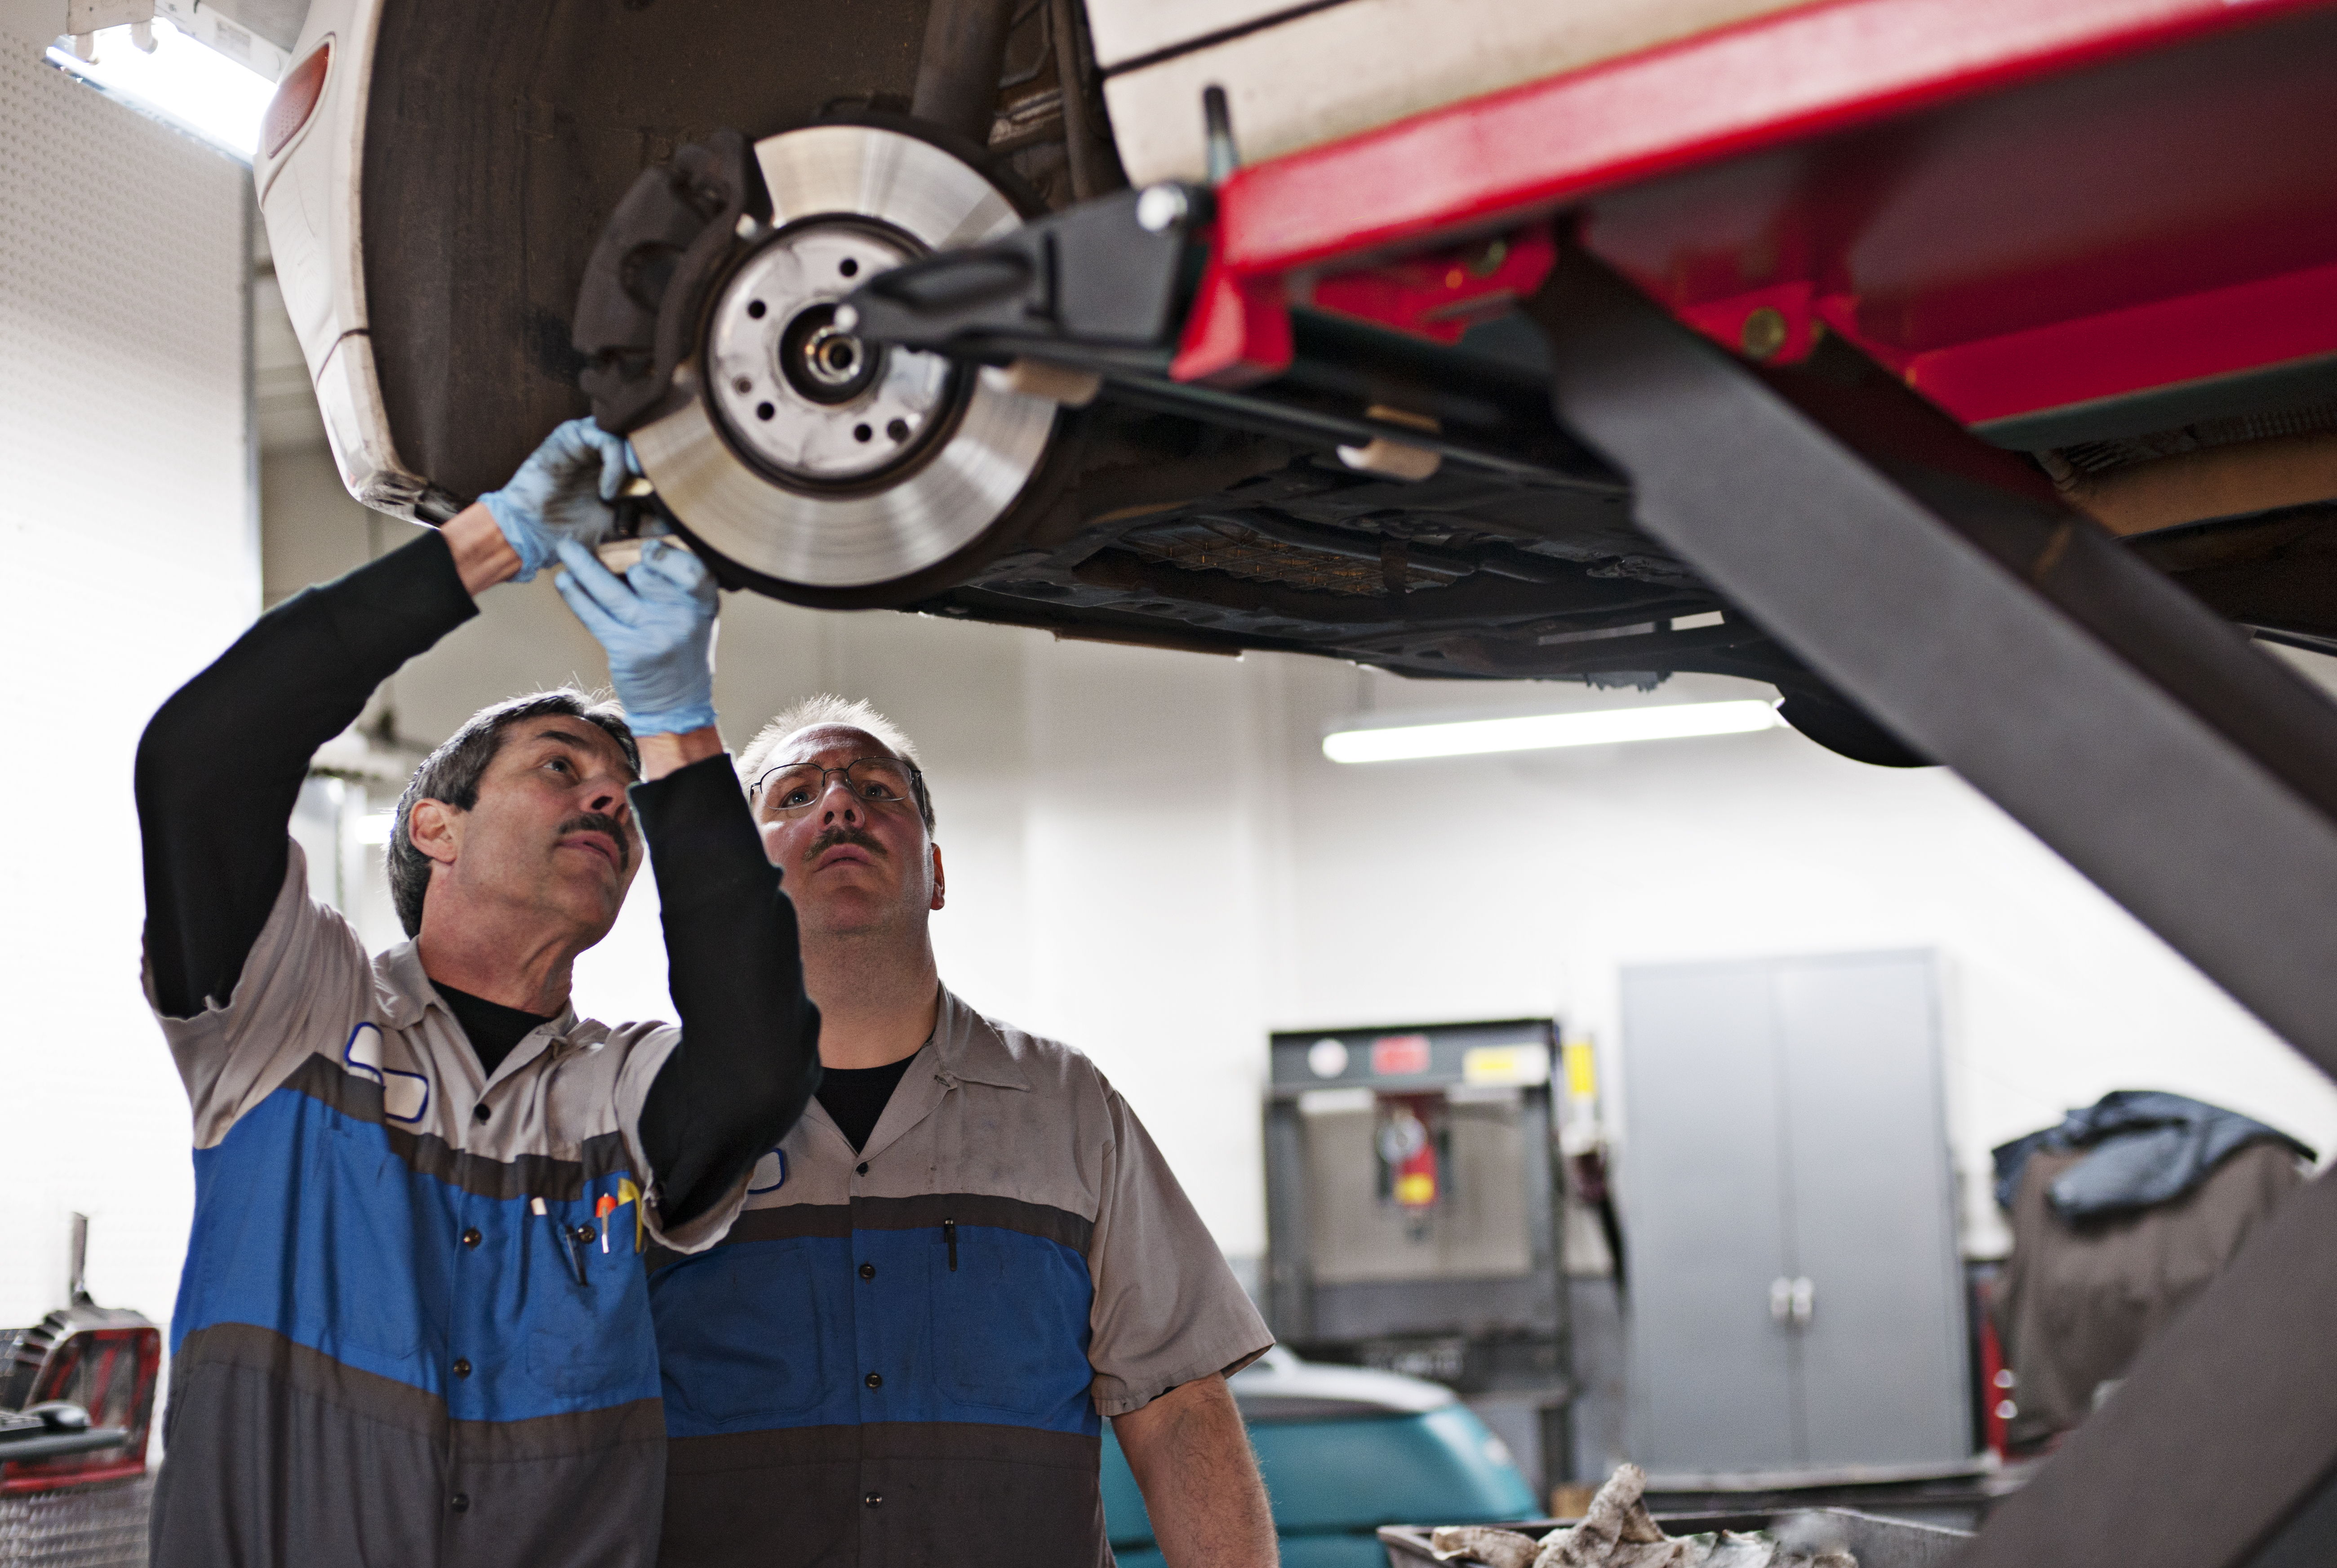 Two technicians engaged in a heavy equipment repair.